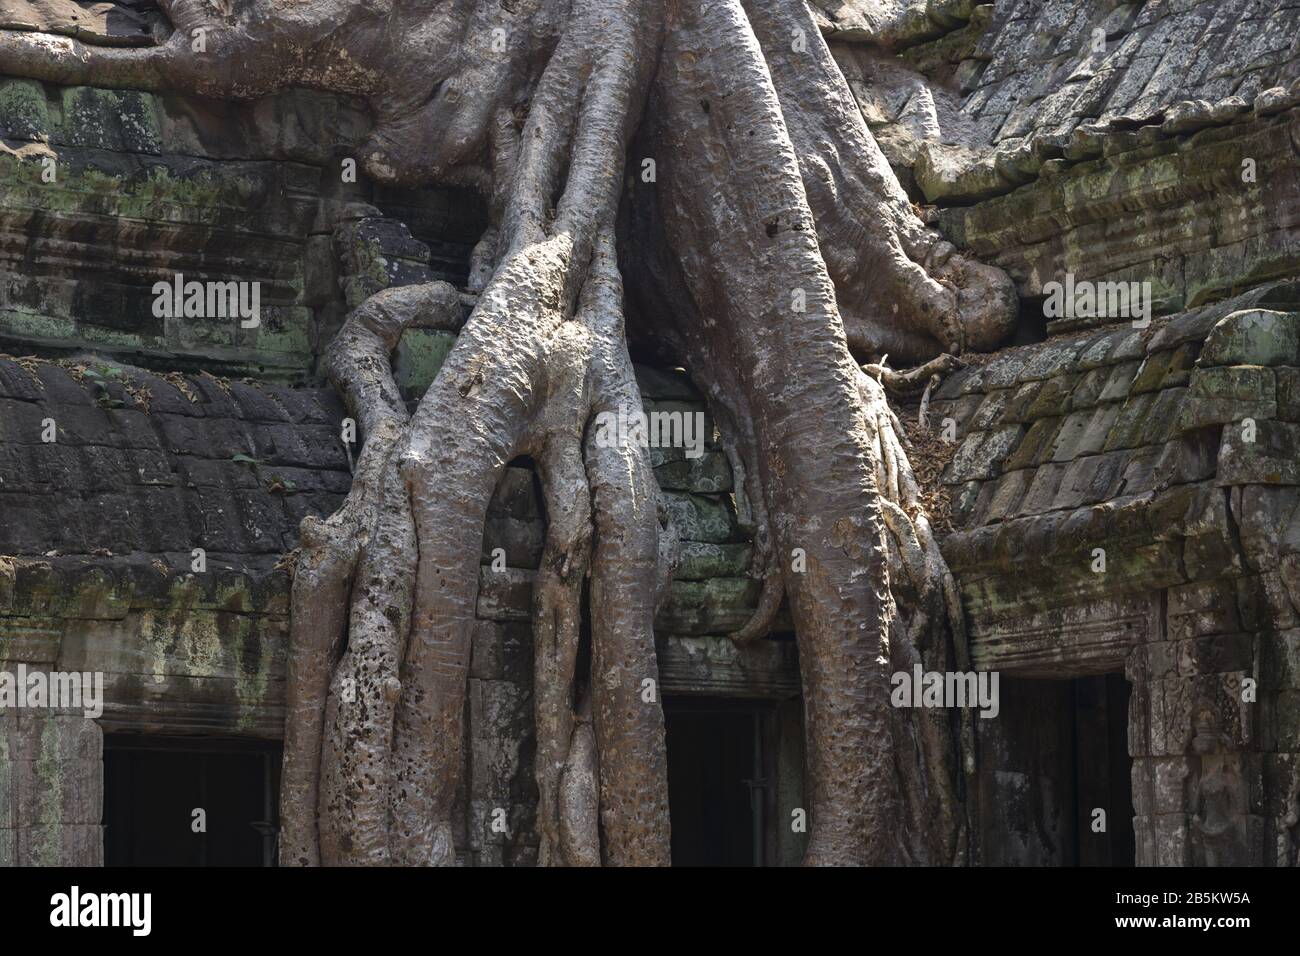 Massive Tree Roots growing from Ancient Ta Prohm Khmer Temple Ruins, Tomb Raider movie filming site. Angkor Wat Buddhist Complex, Siem Reap, Cambodia Stock Photo